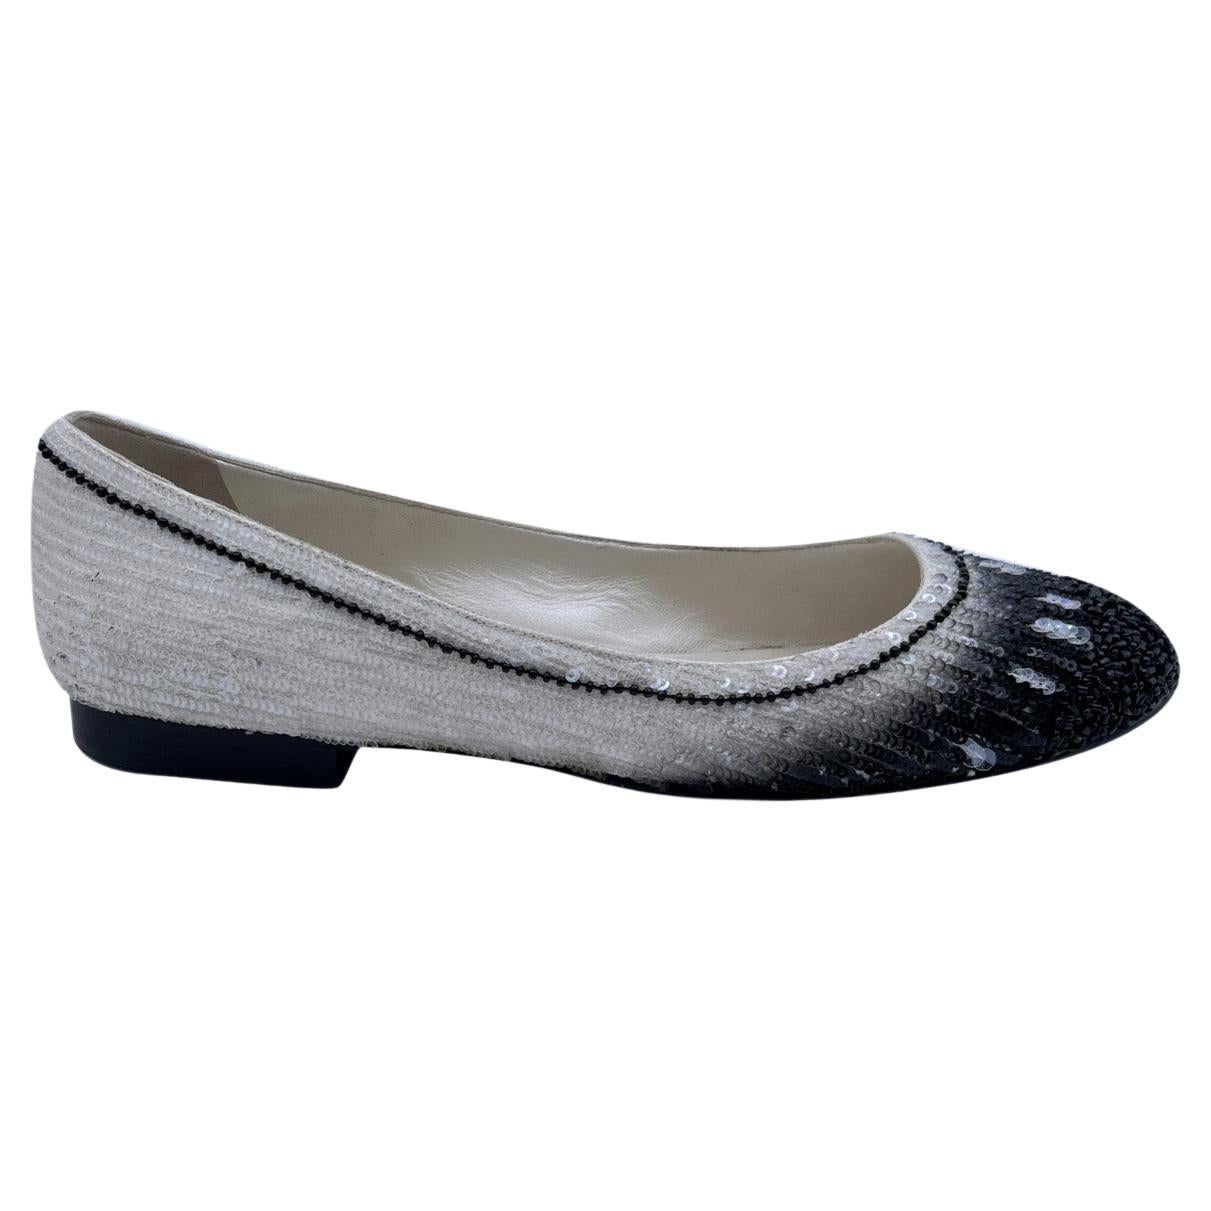 Chanel Black and White Sequinned Ballet Flats Shoes Size 40